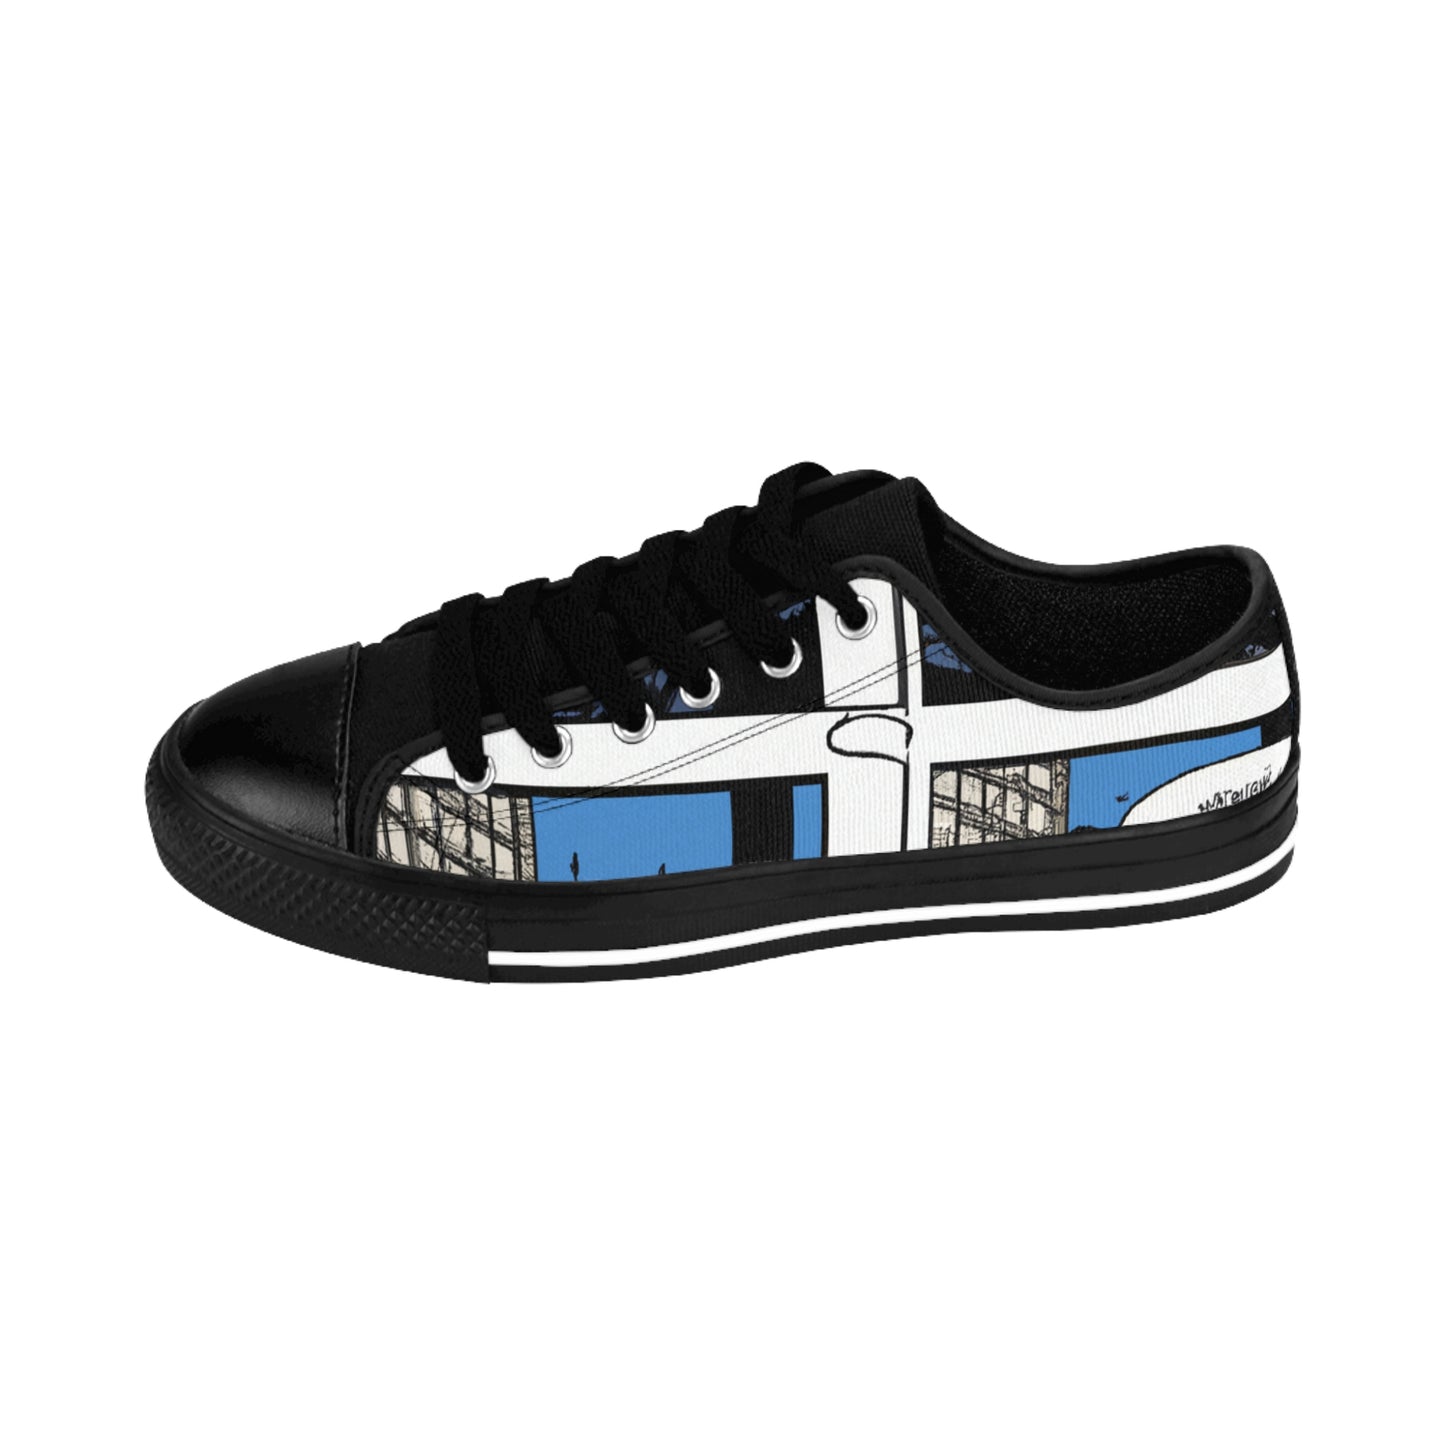 .

Sir Finney the Shoemaker - Comic Book Low Top